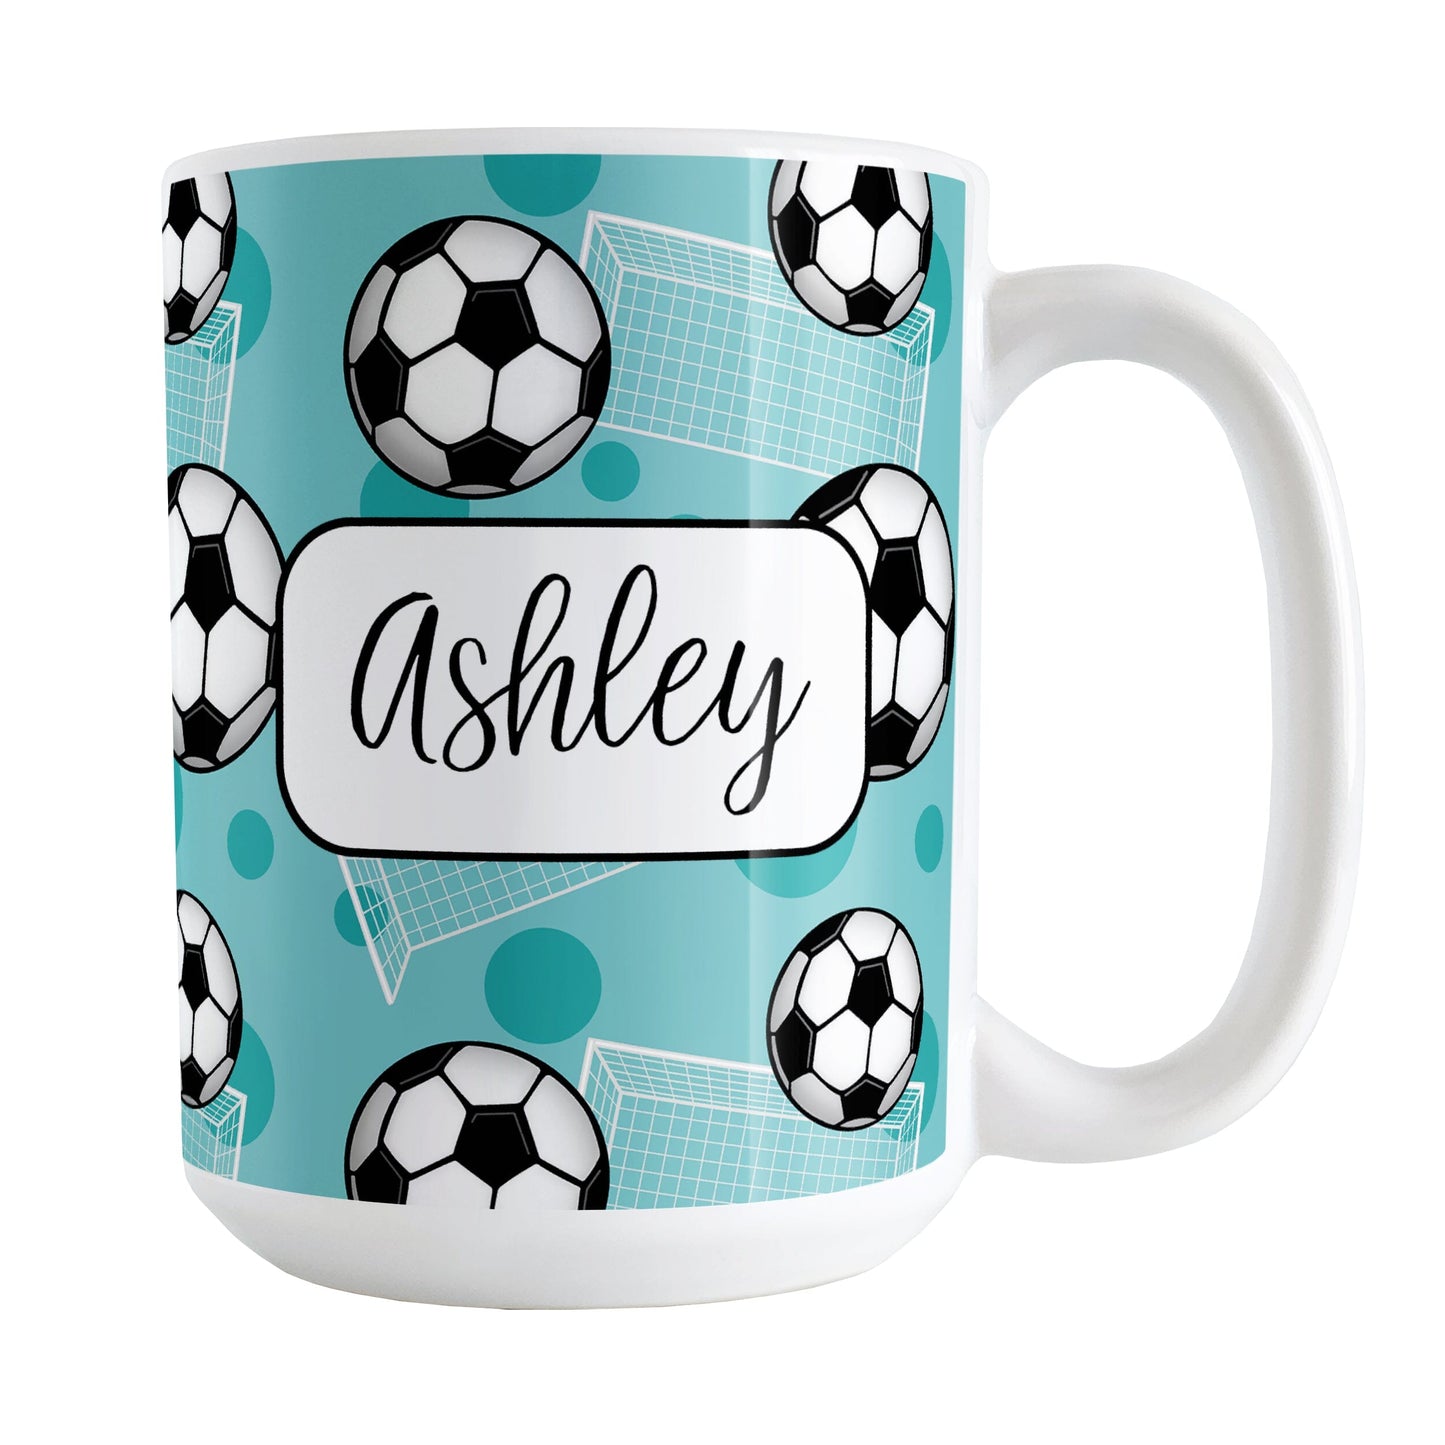 Soccer Ball and Goal Personalized Teal Soccer Mug (15oz) at Amy's Coffee Mugs. A ceramic coffee mug designed with a pattern of soccer balls and white soccer goals over a teal background with teal circles. Your personalized name is custom-printed in a fun black script font on both sides of the mug over the soccer pattern. 